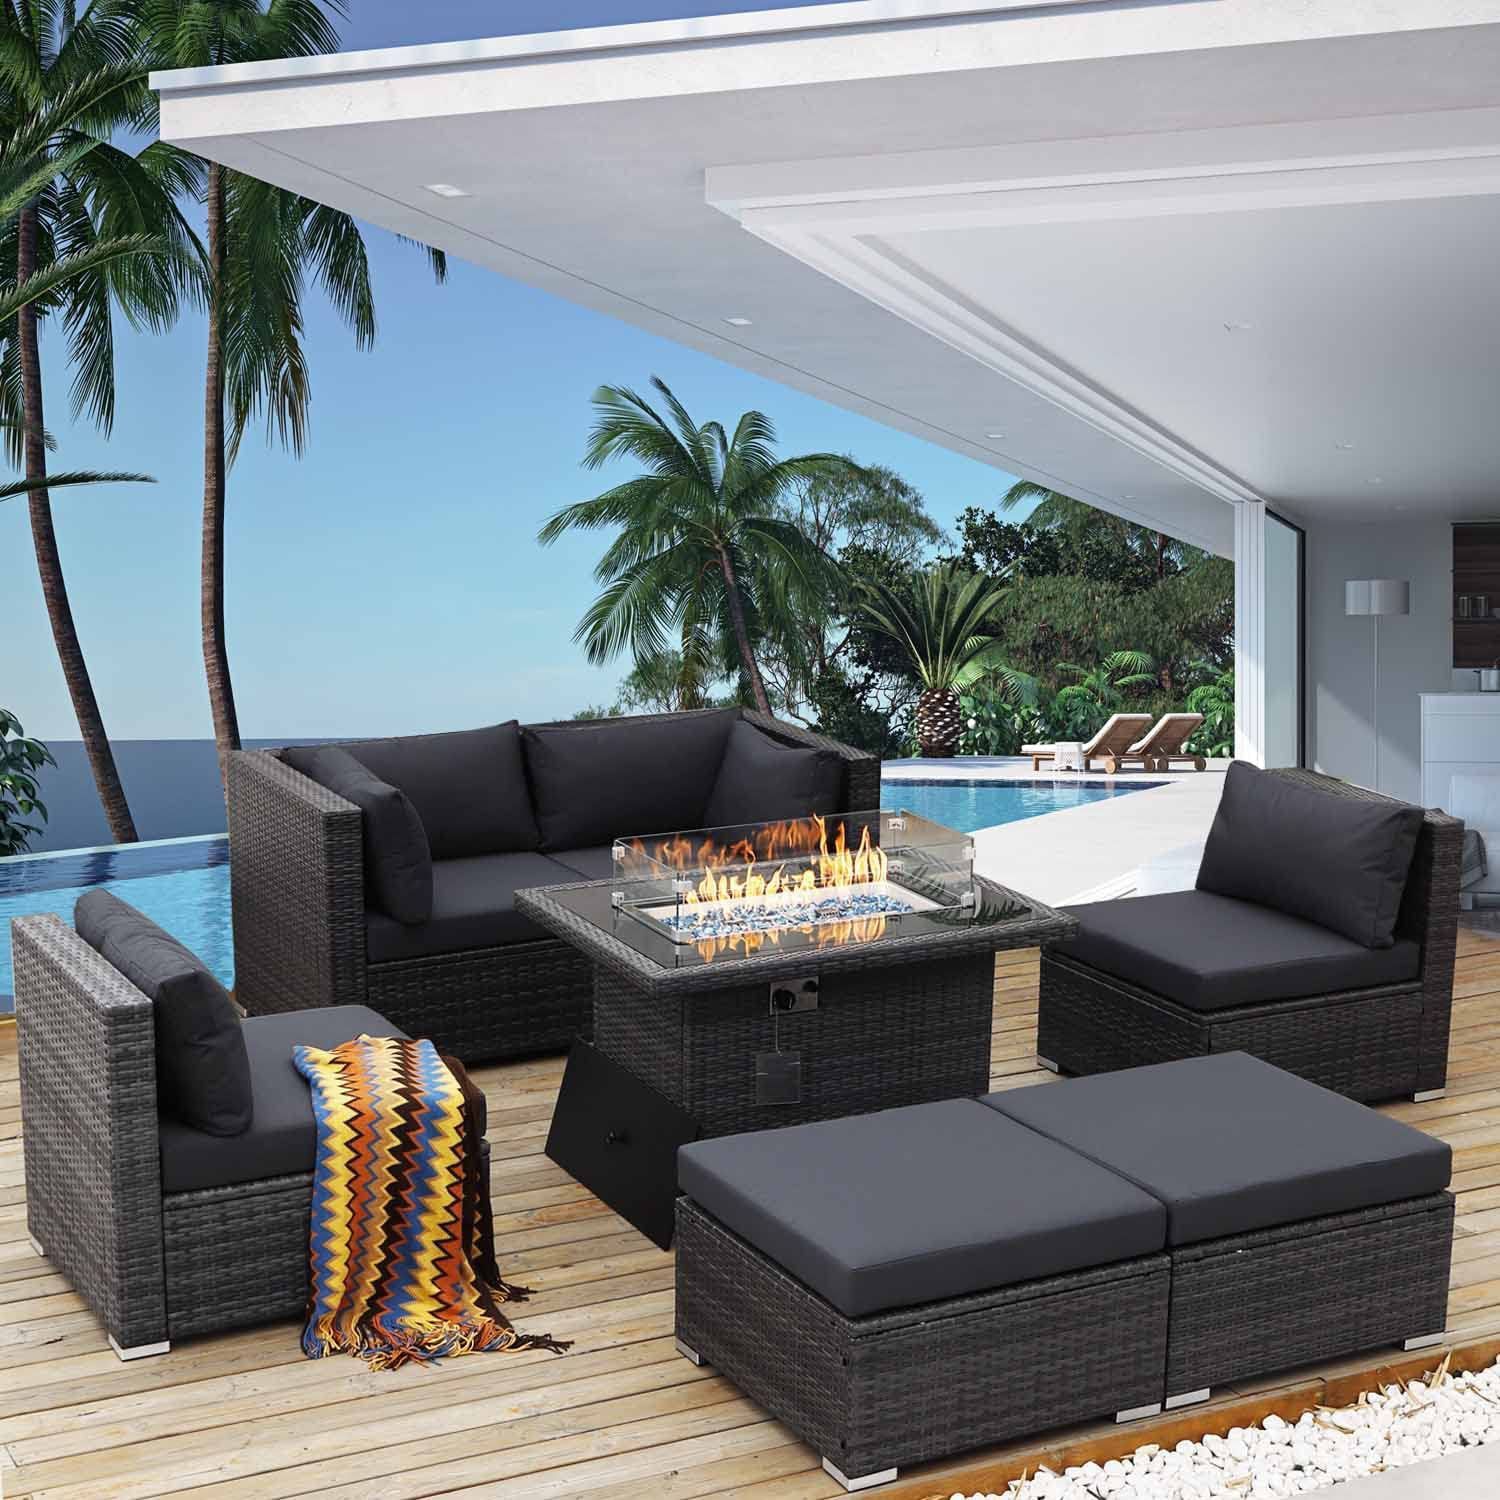 Nicesoul 7 Pcs Outdoor Sofa Sets With Fire Pit Table Wicker, Dark Grey –  Walmart Regarding Fire Pit Table Wicker Sectional Sofa Set (View 2 of 15)